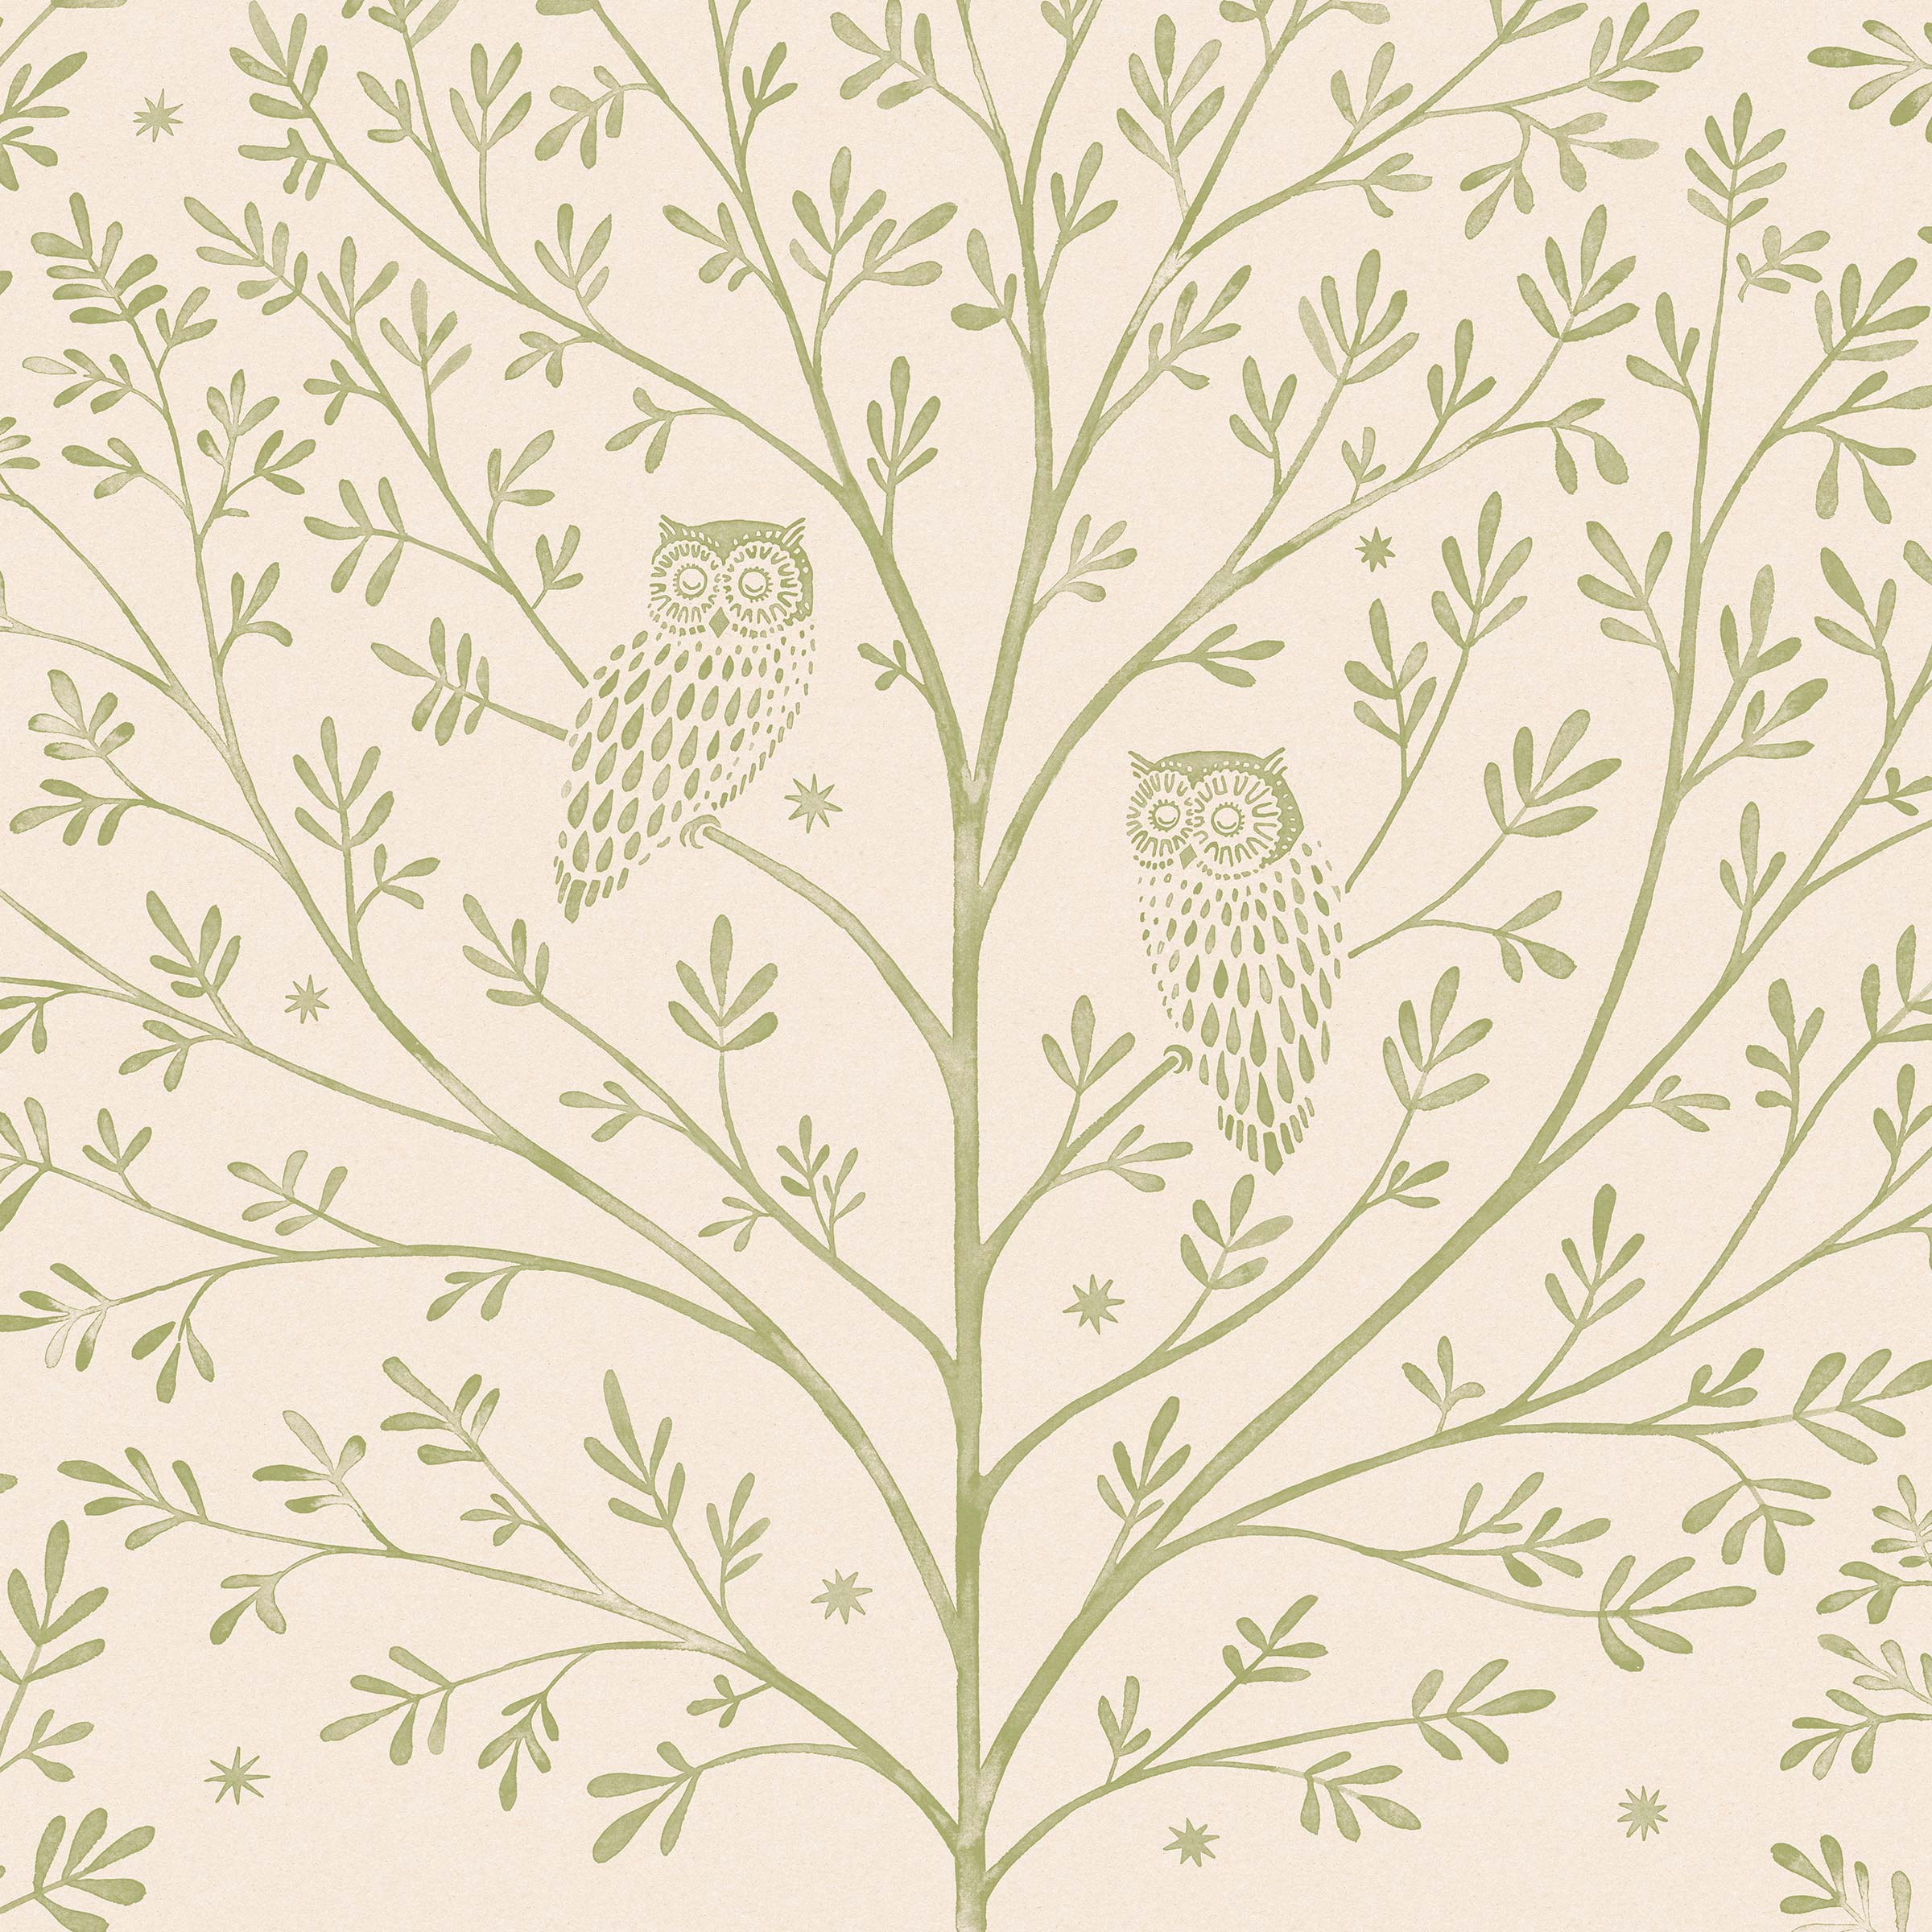 Detail of wallpaper in a repeating owl and tree print in light green on a cream field.